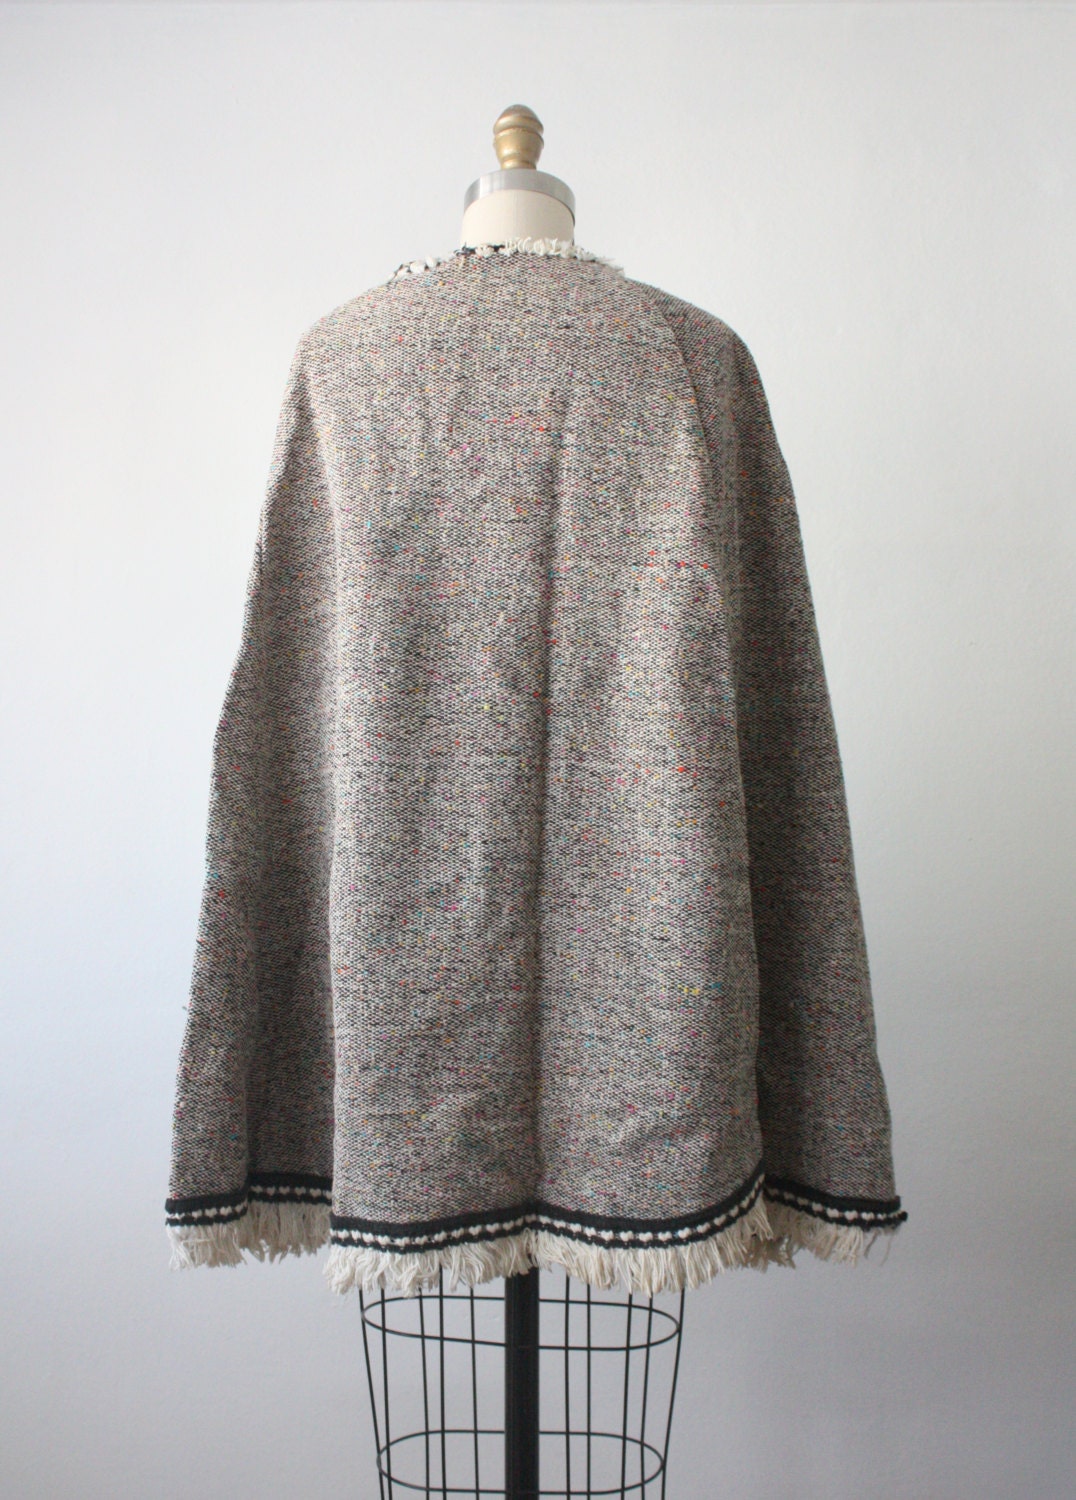 woven cape / vintage 1960s tweed wool cape